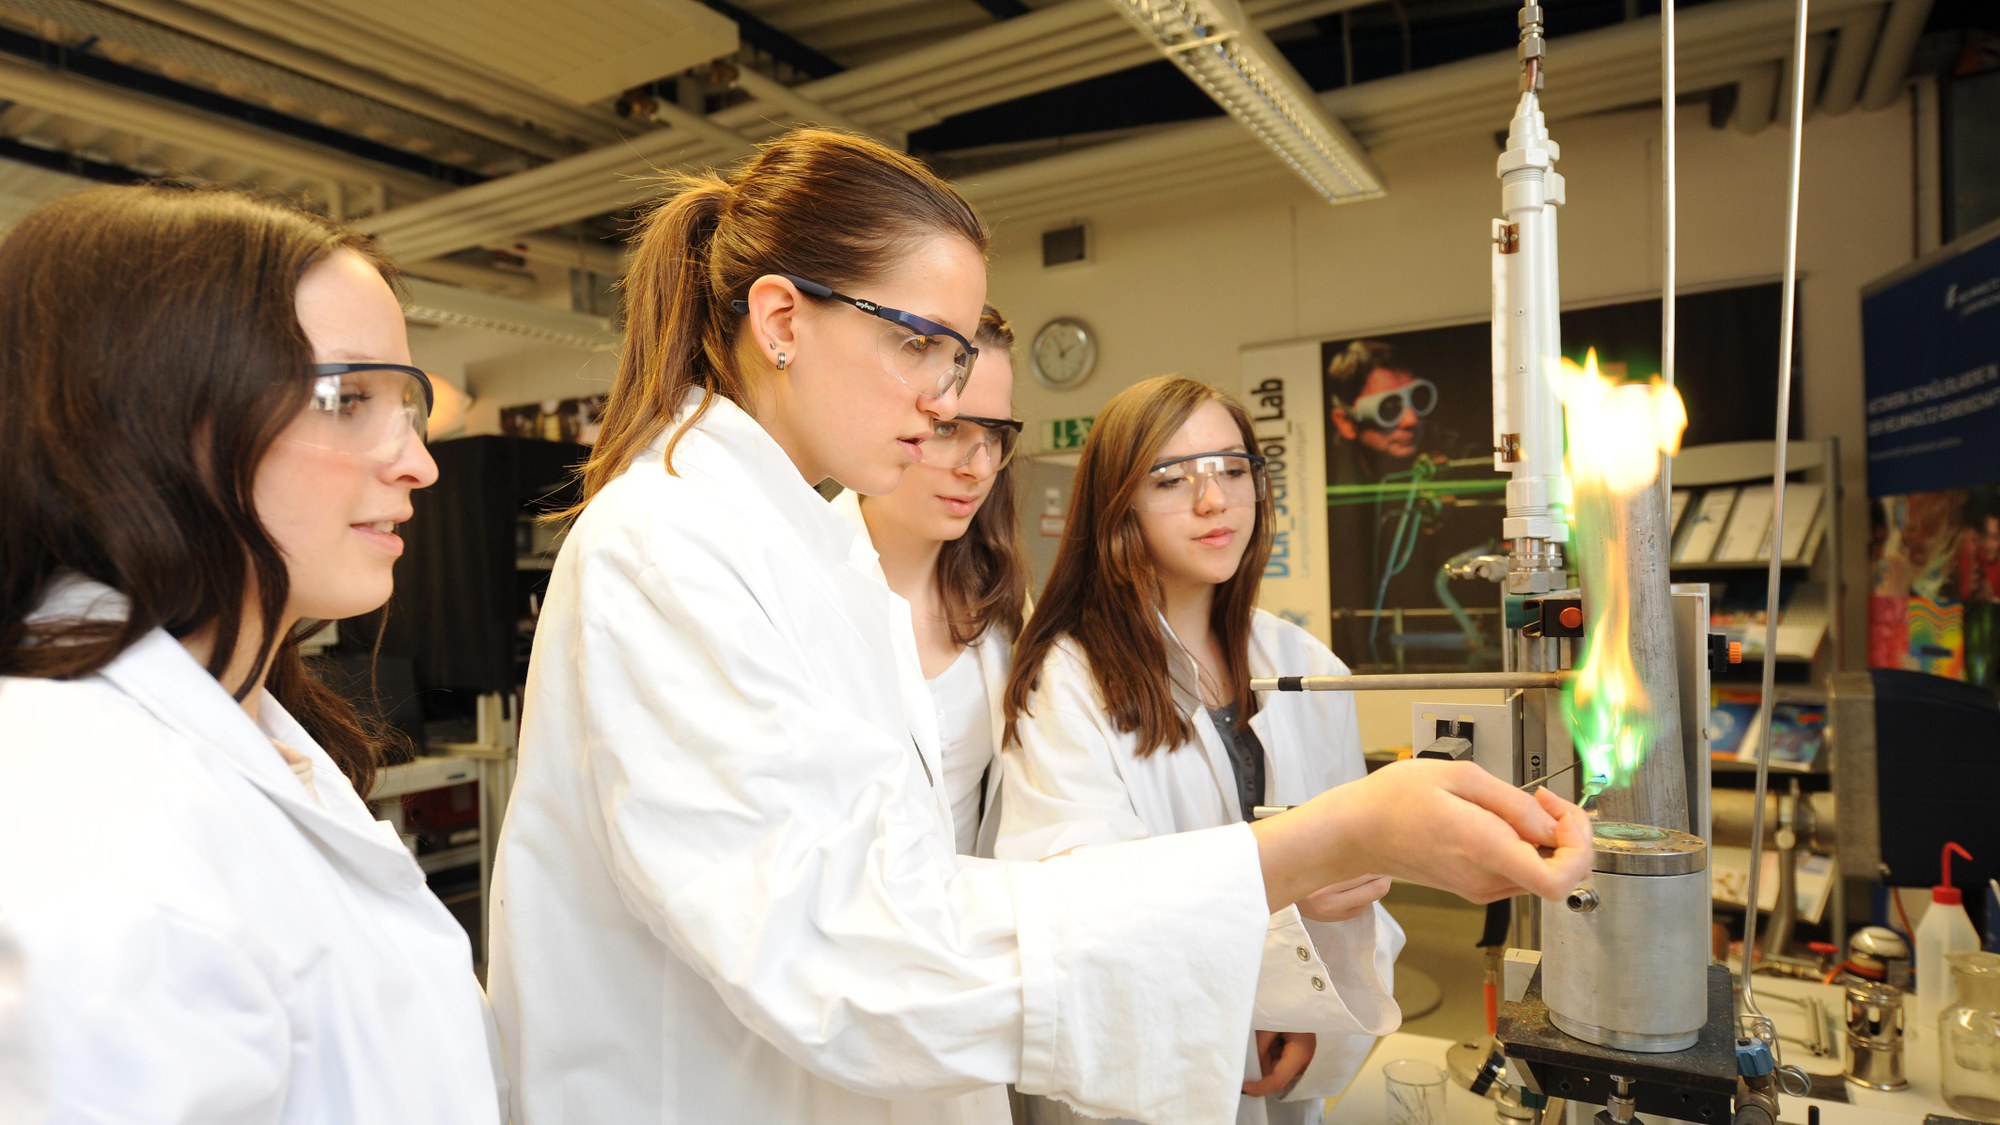 Space for young people – the DLR_School_Lab in Lampoldshausen